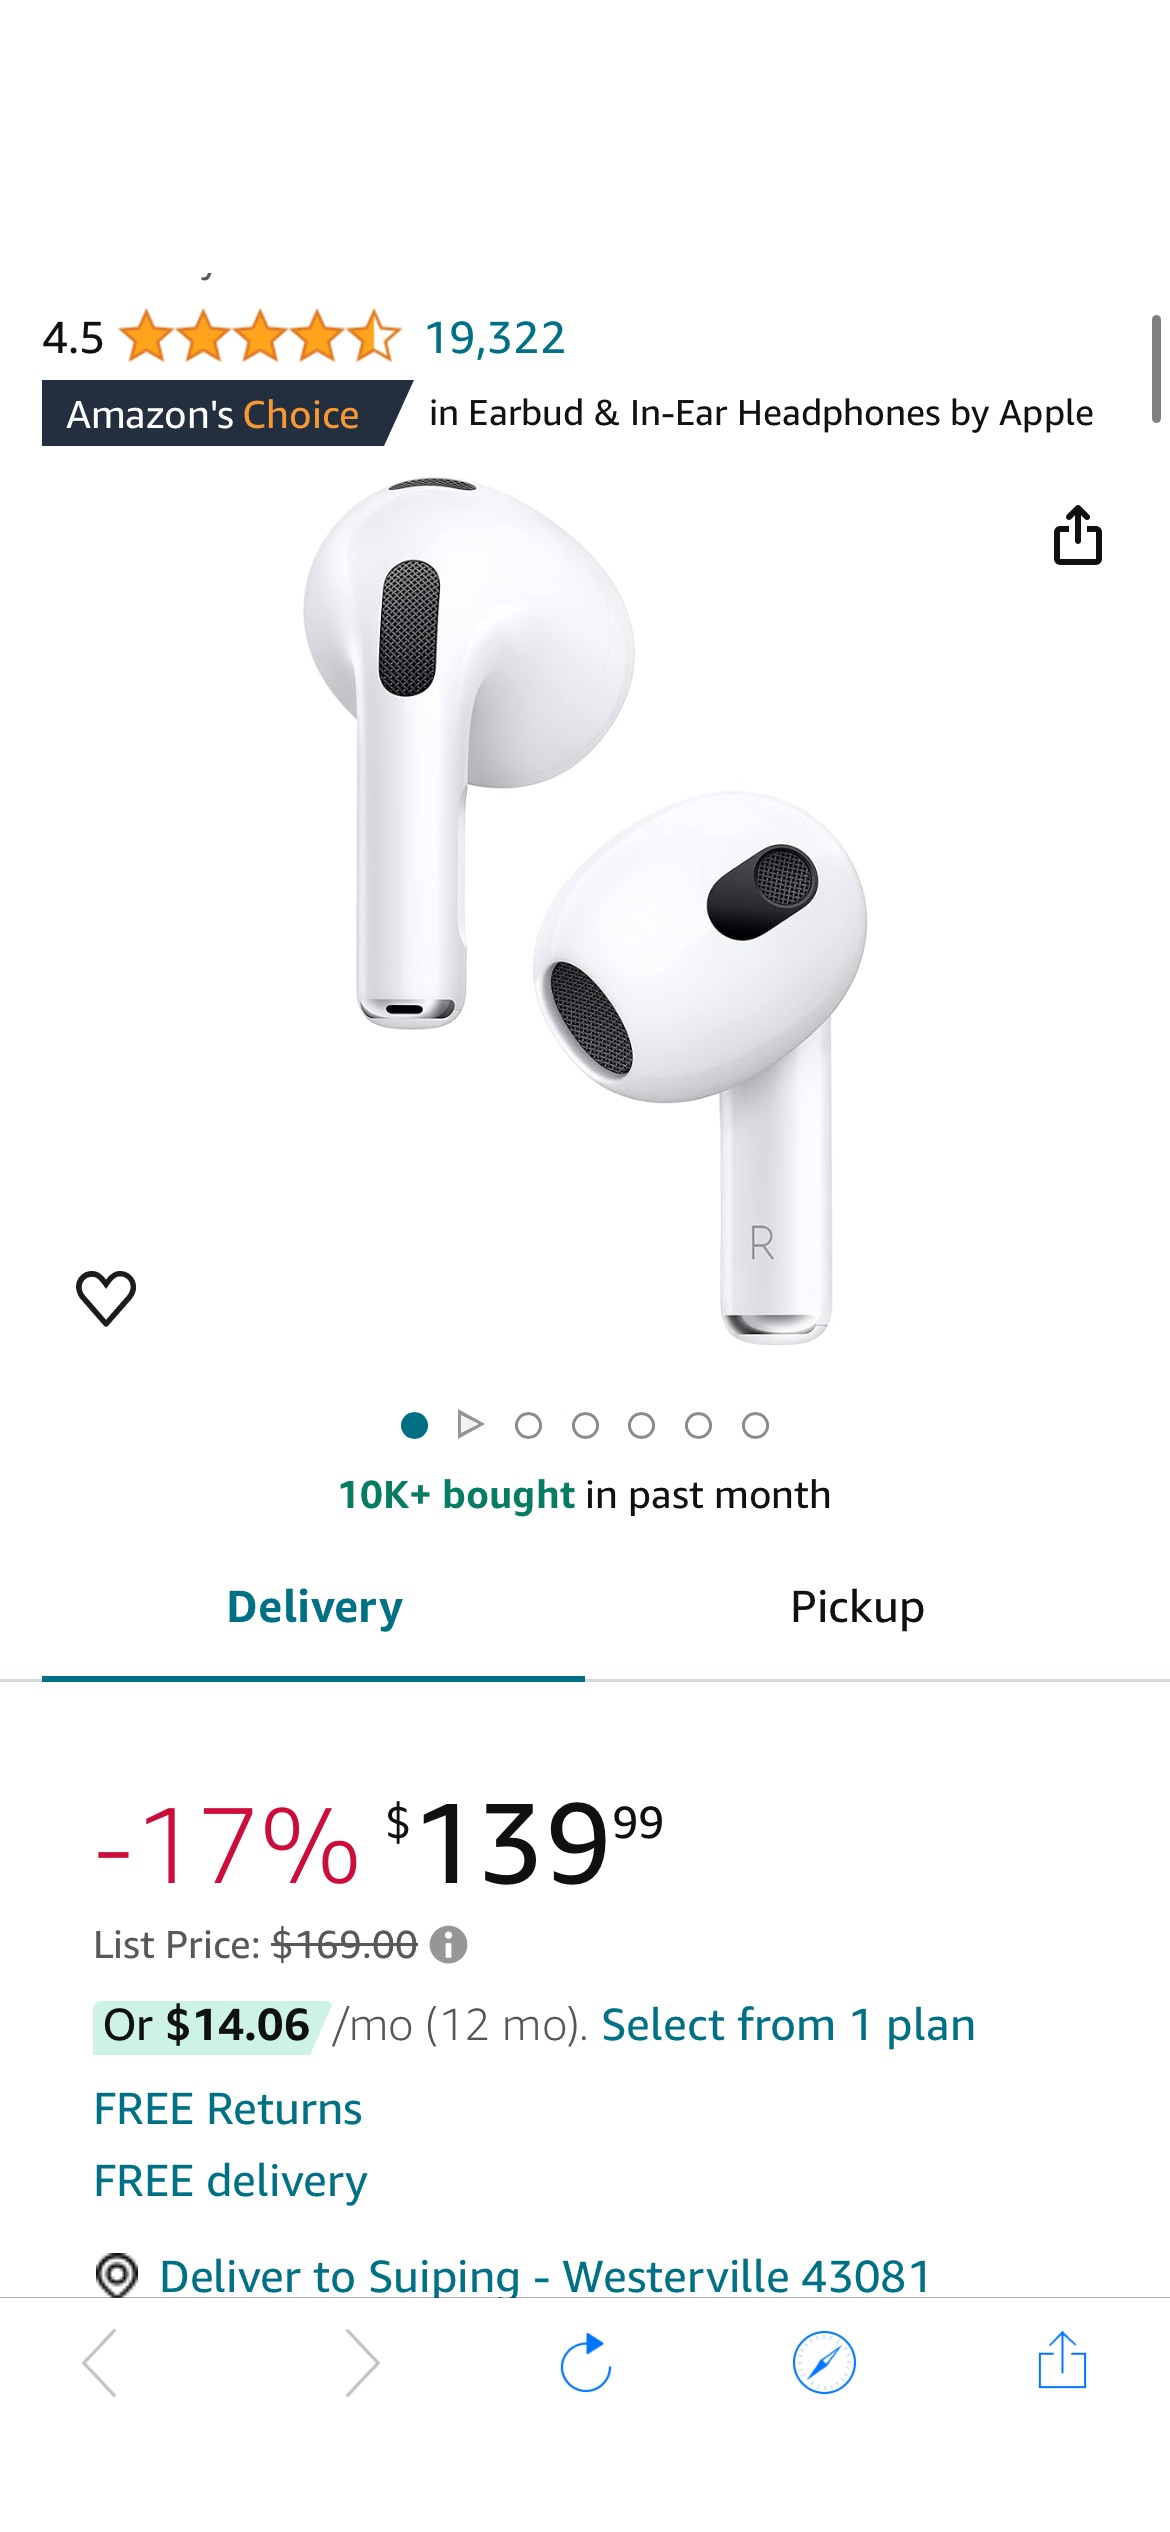 Amazon.com: Apple AirPods (3rd Generation) Wireless Ear Buds, Bluetooth Headphones, Personalized Spatial Audio, Sweat and Water Resistant, Lightning Charging Case Included, Up to 30 Hours of Battery L